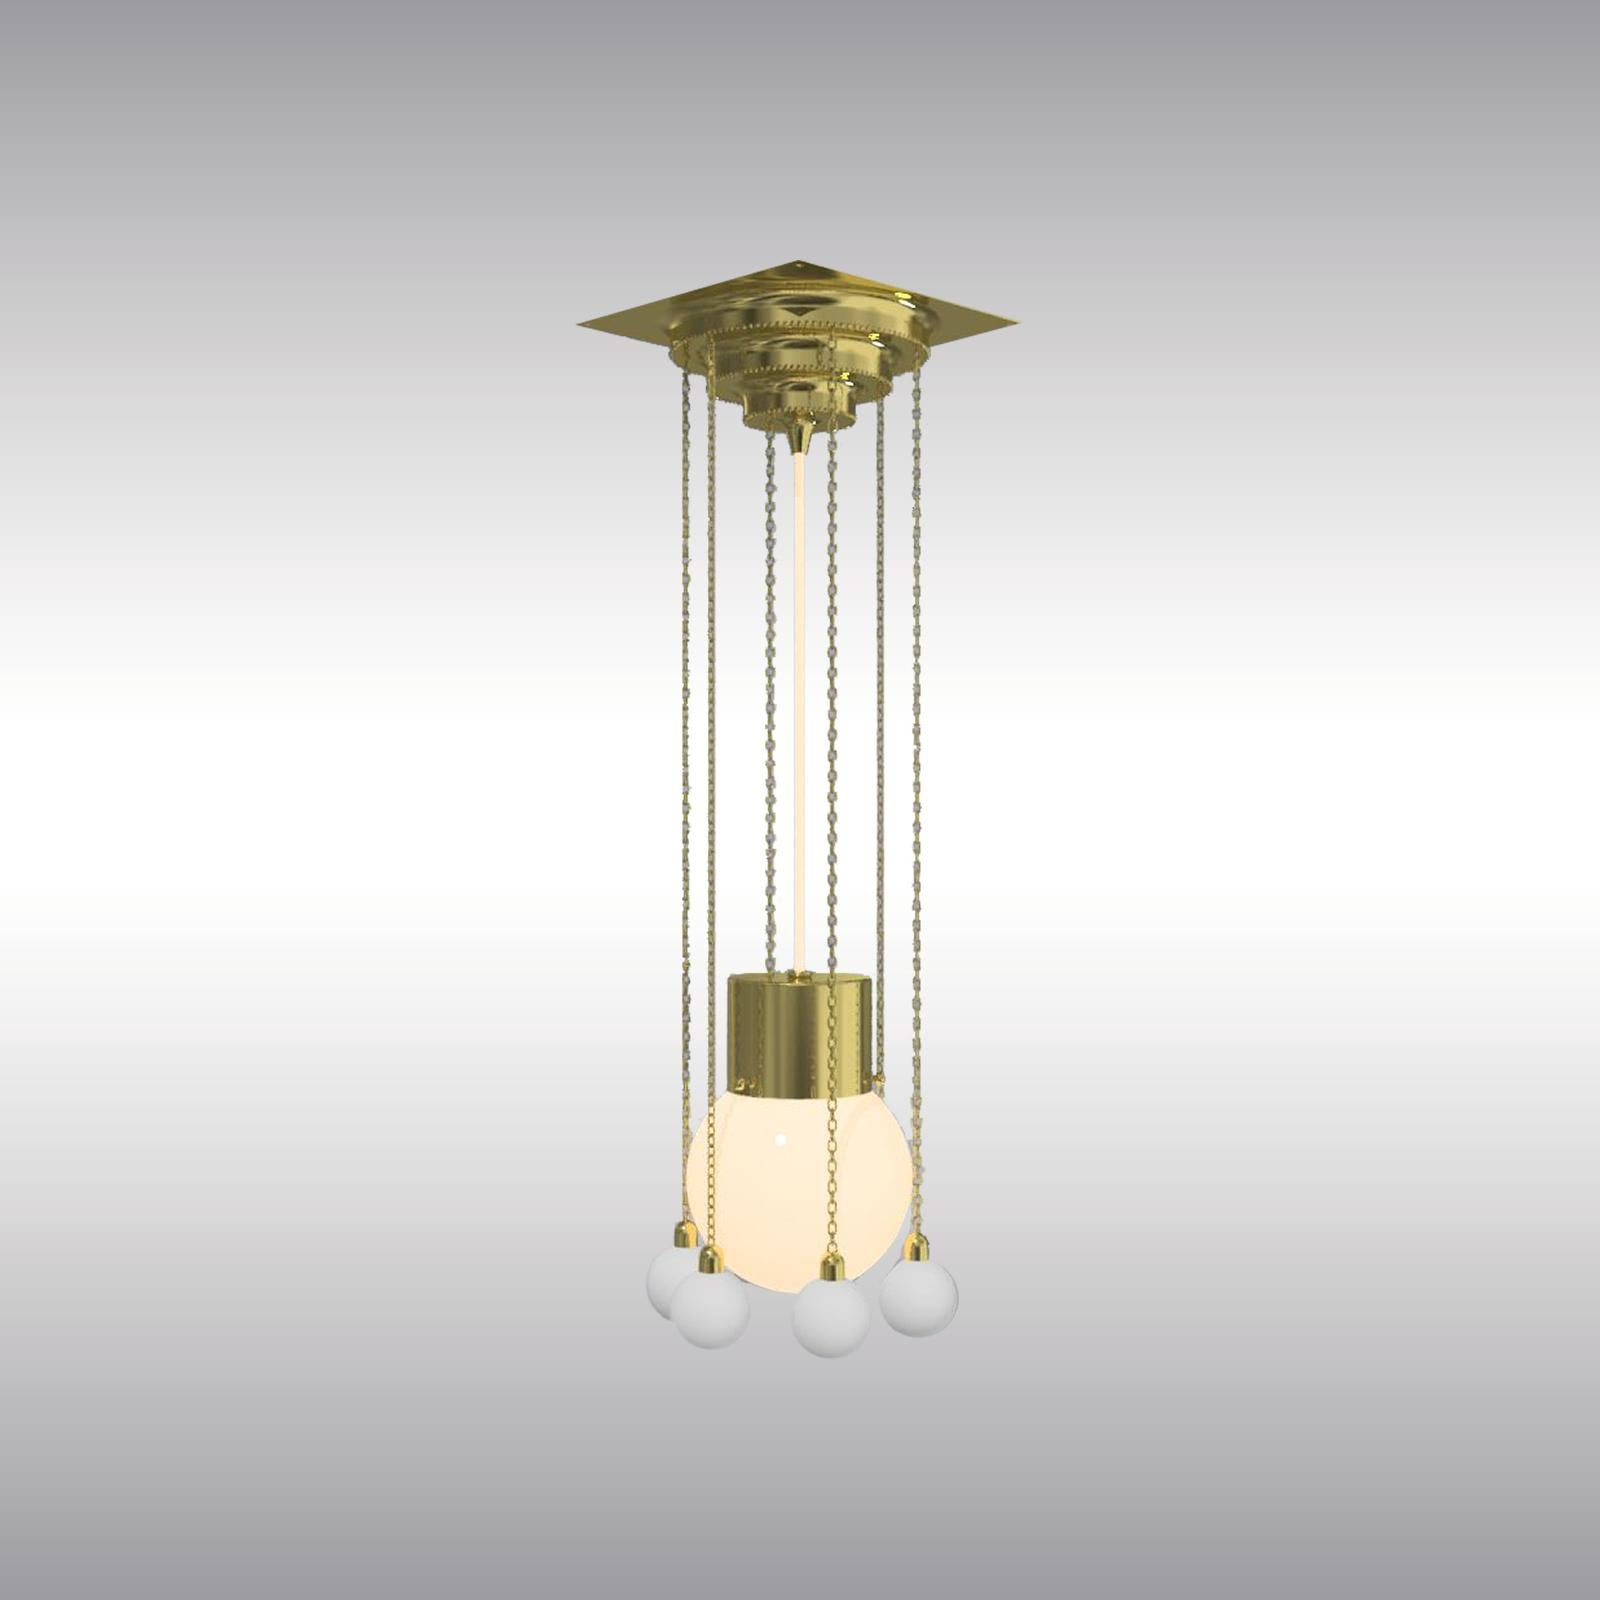 An elegant and delicate pendant designed by Josef Hoffmann
Most components according to the UL regulations, with an additional charge we will UL-list and label our fixtures.